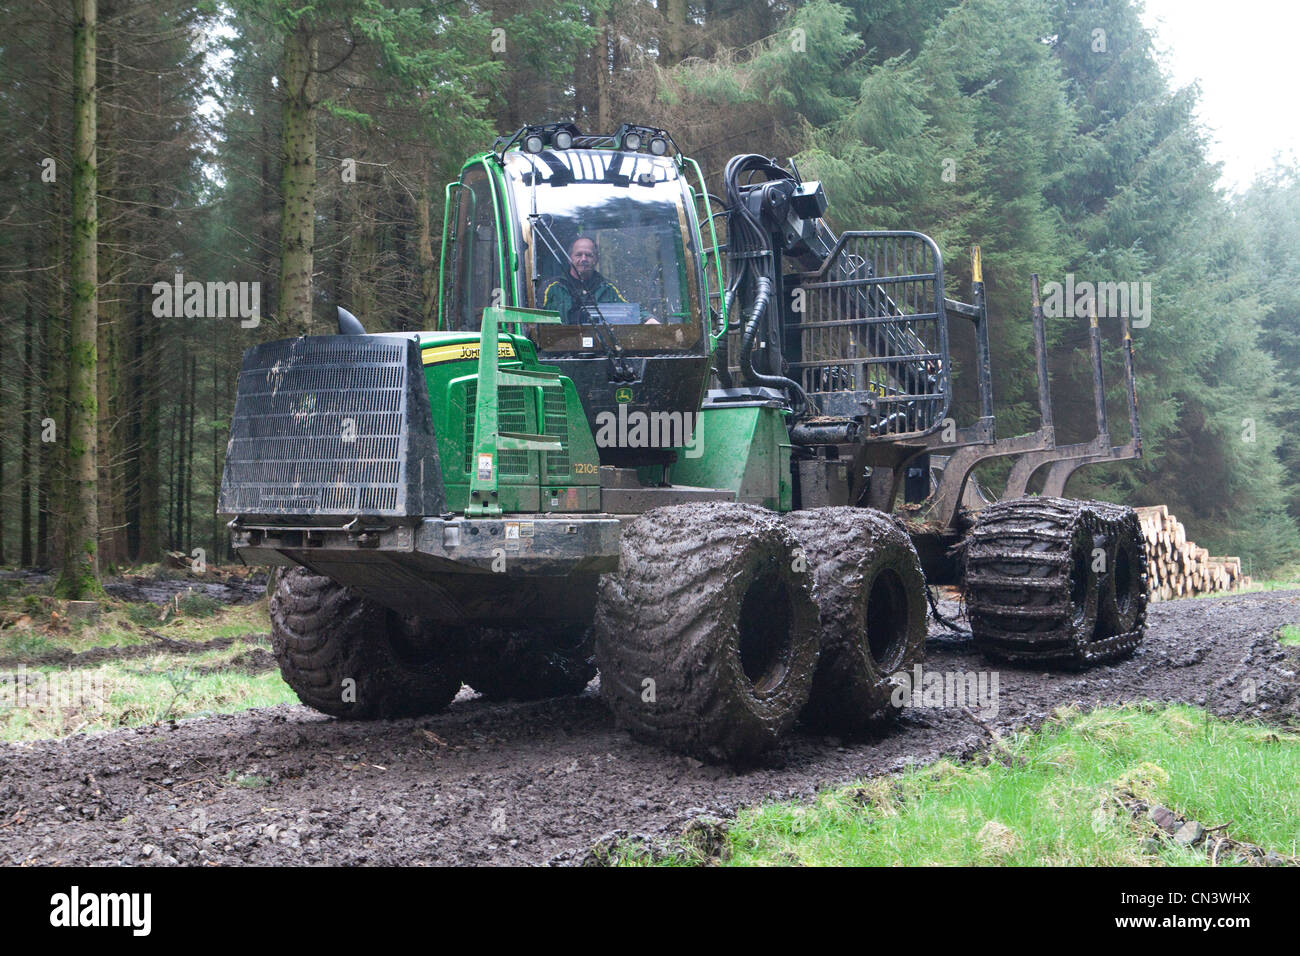 Commercial forestry a forwarder, all terrain vehicle, working picking up cut trees lumber in the forest Forestry Commission, UK Stock Photo